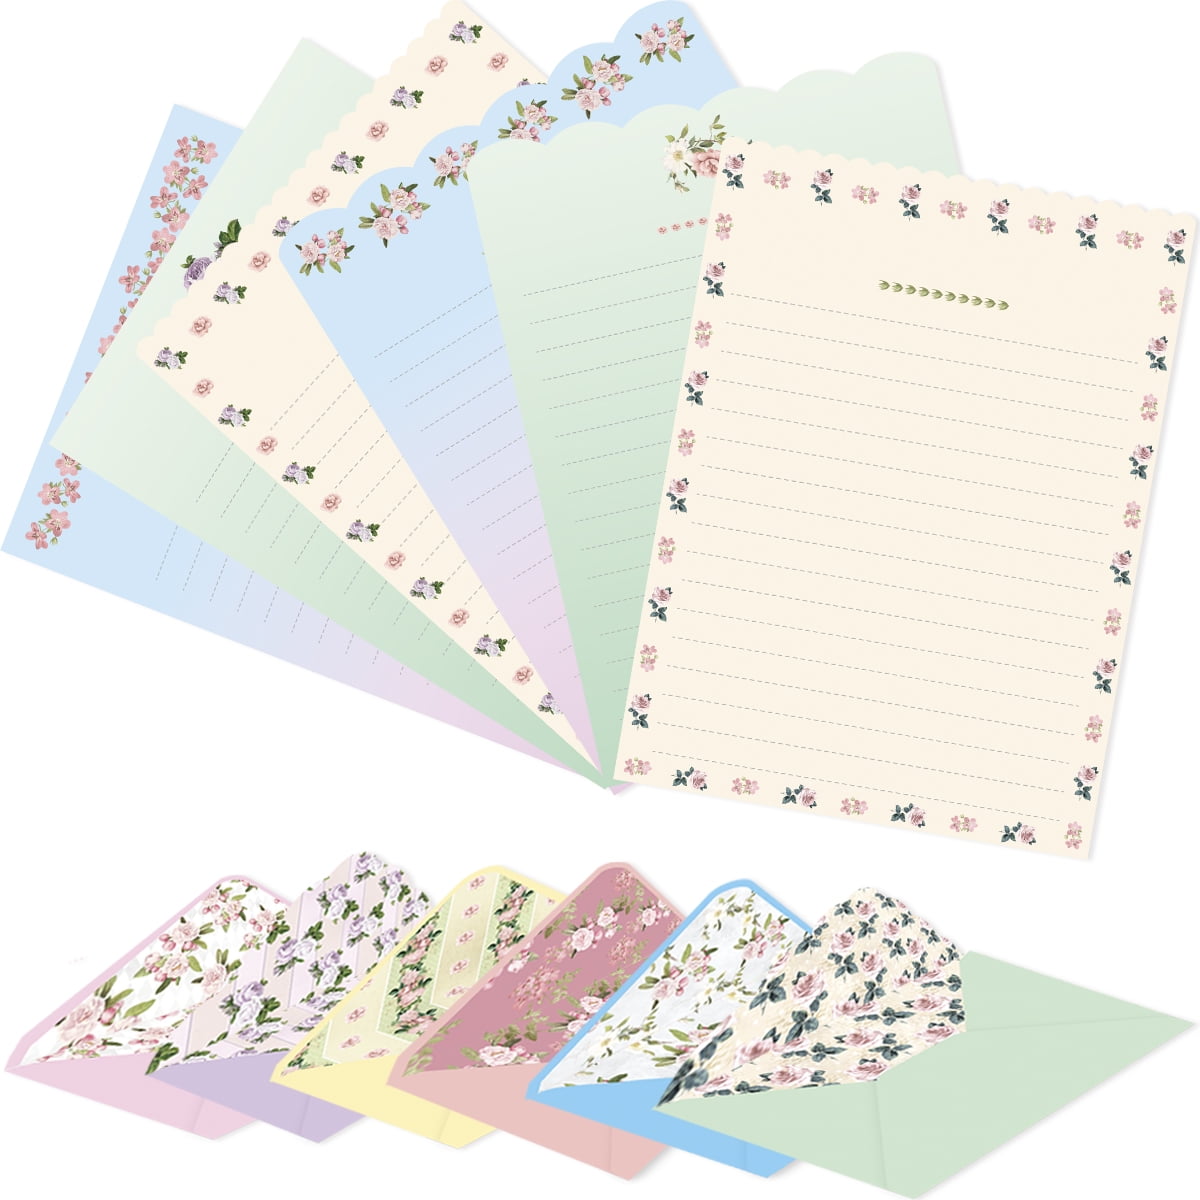 8x Vintage Design Writing Paper Letter Pad Envelopes Student Stationery Supplies 